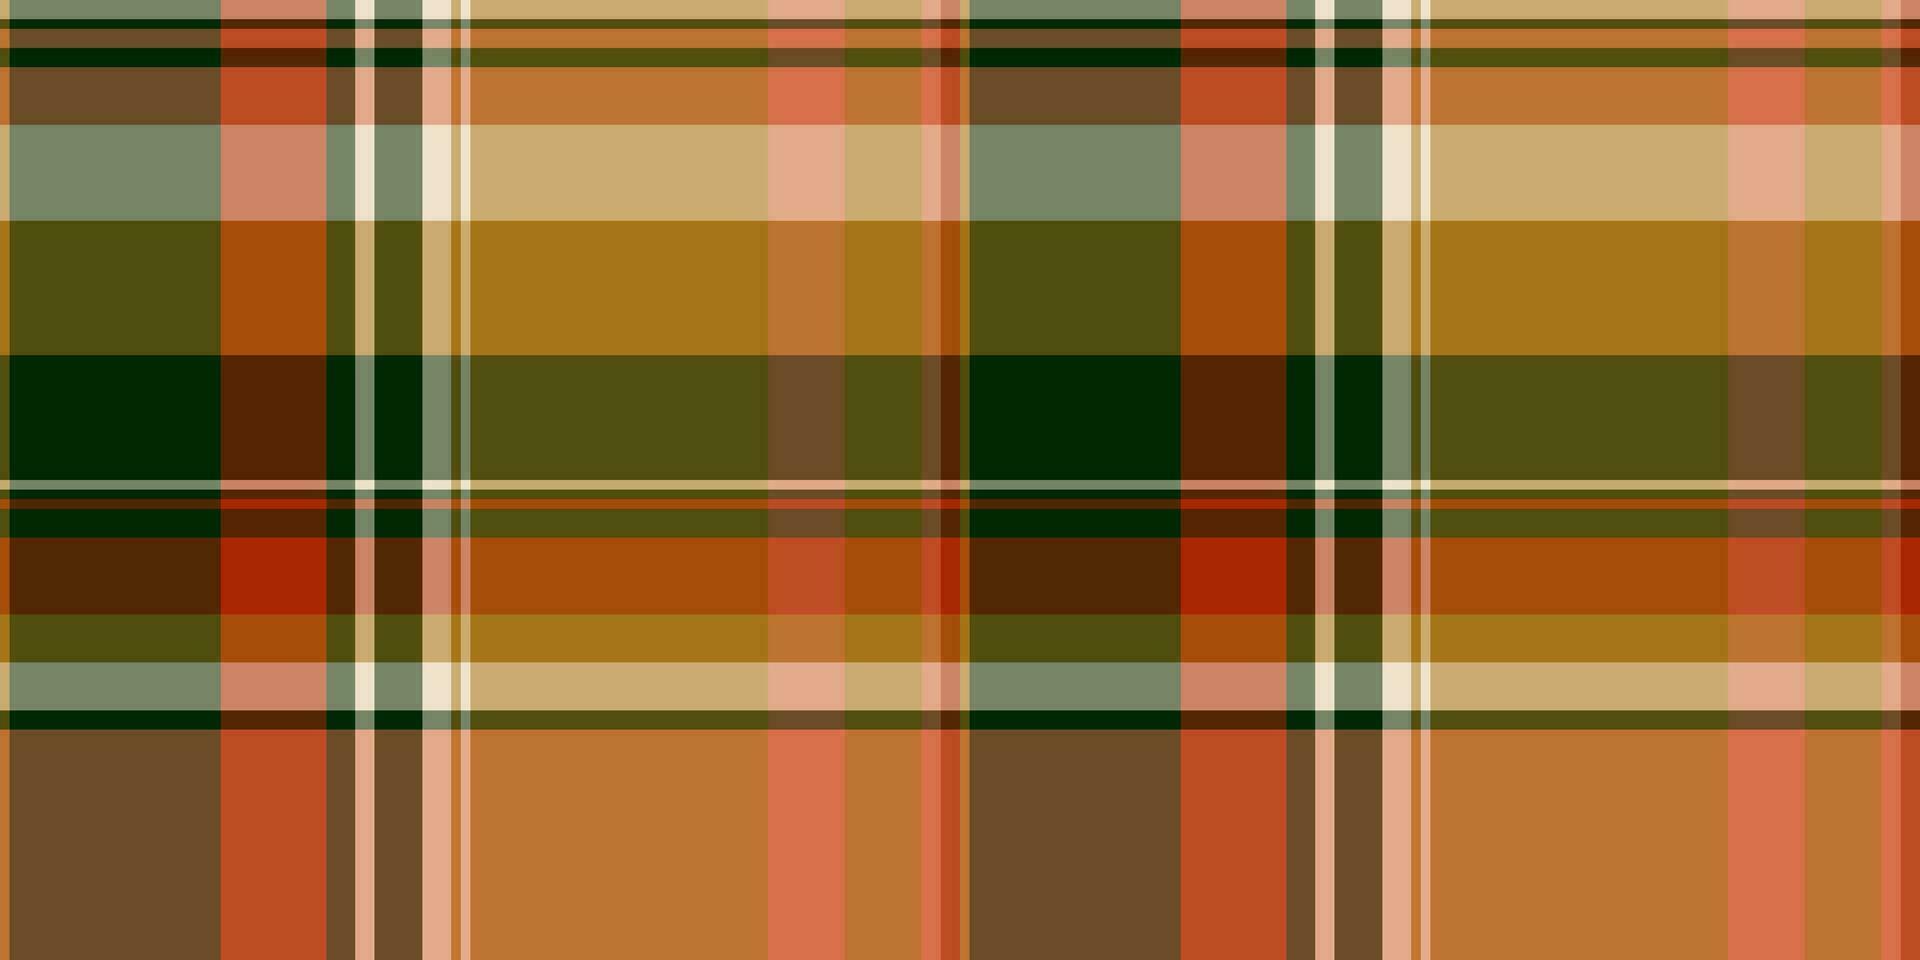 Infant pattern textile check, ethnic texture tartan fabric. Simple vector background seamless plaid in orange and amber colors.